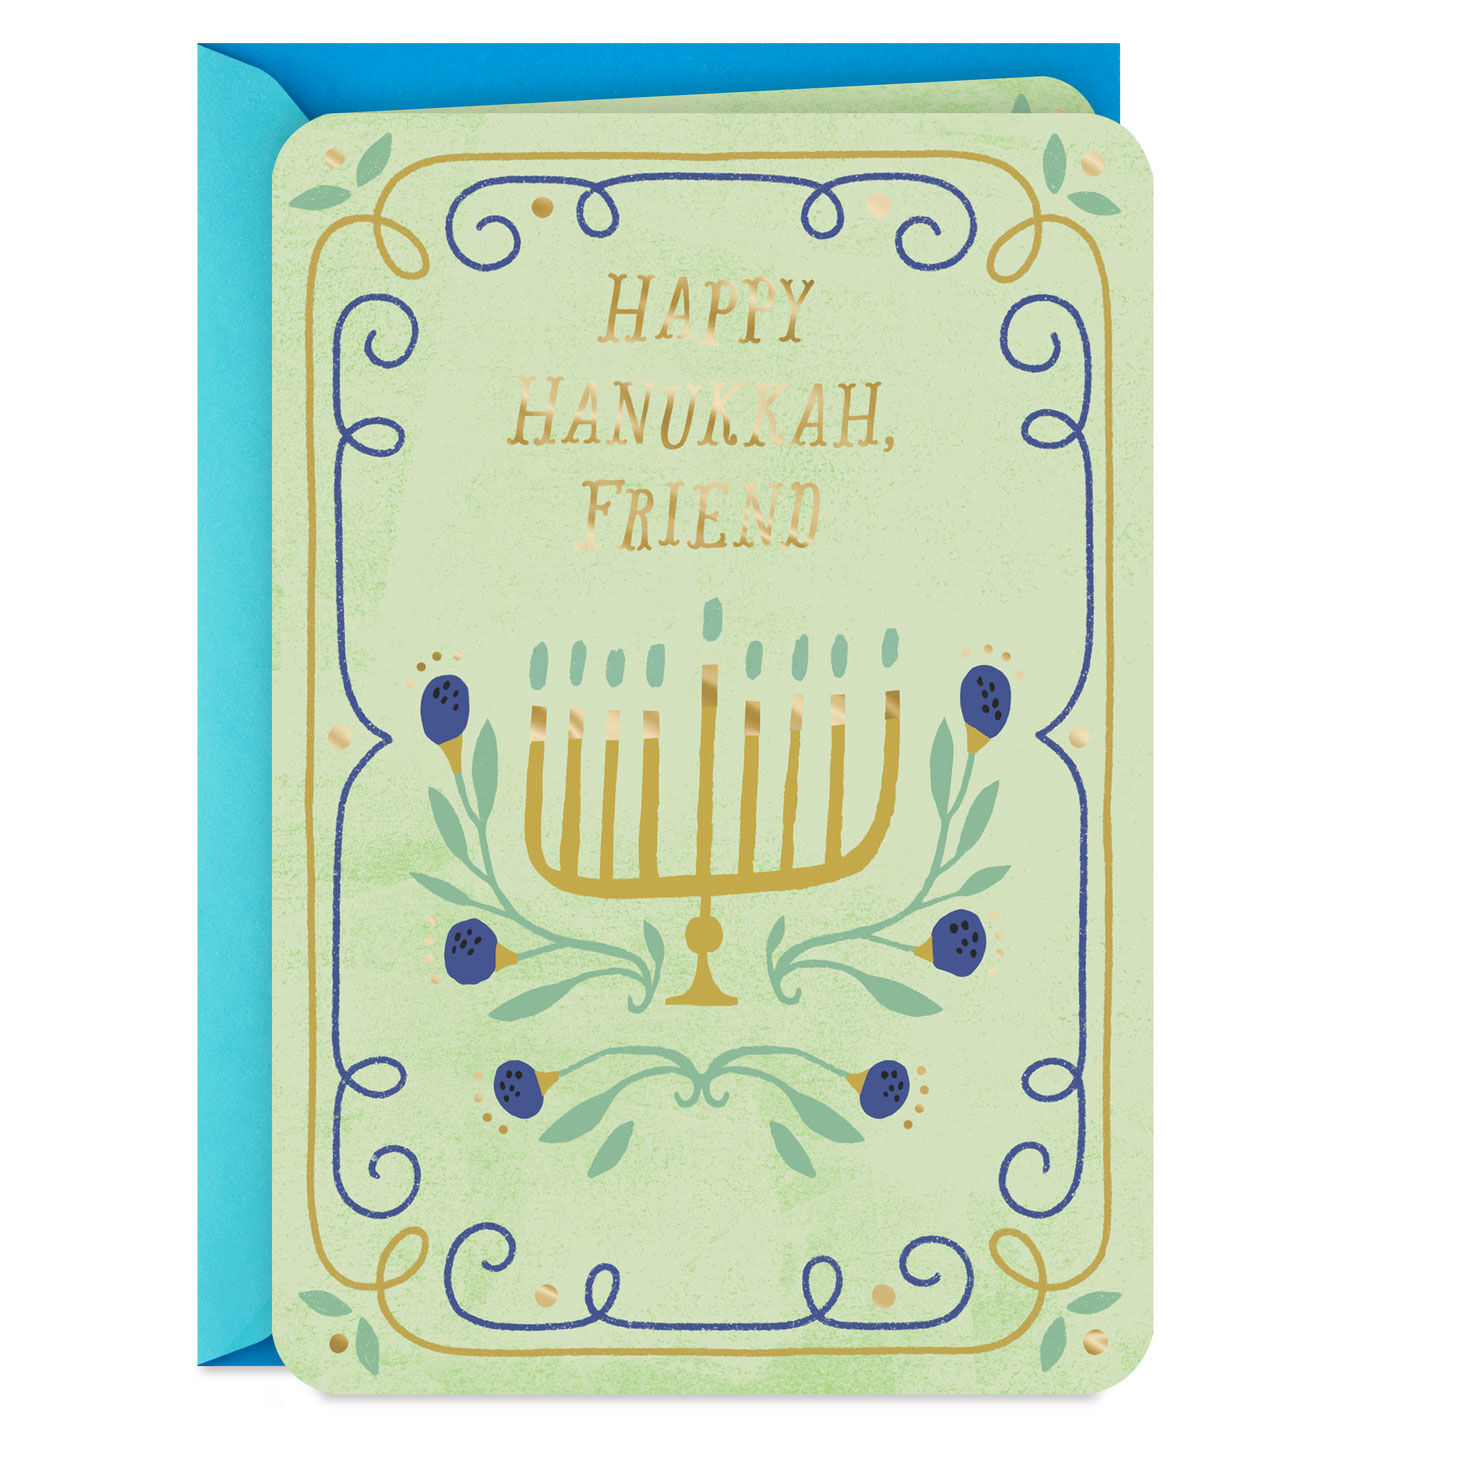 You Bring Good Things to My Life Hanukkah Card for Friend for only USD 2.99 | Hallmark